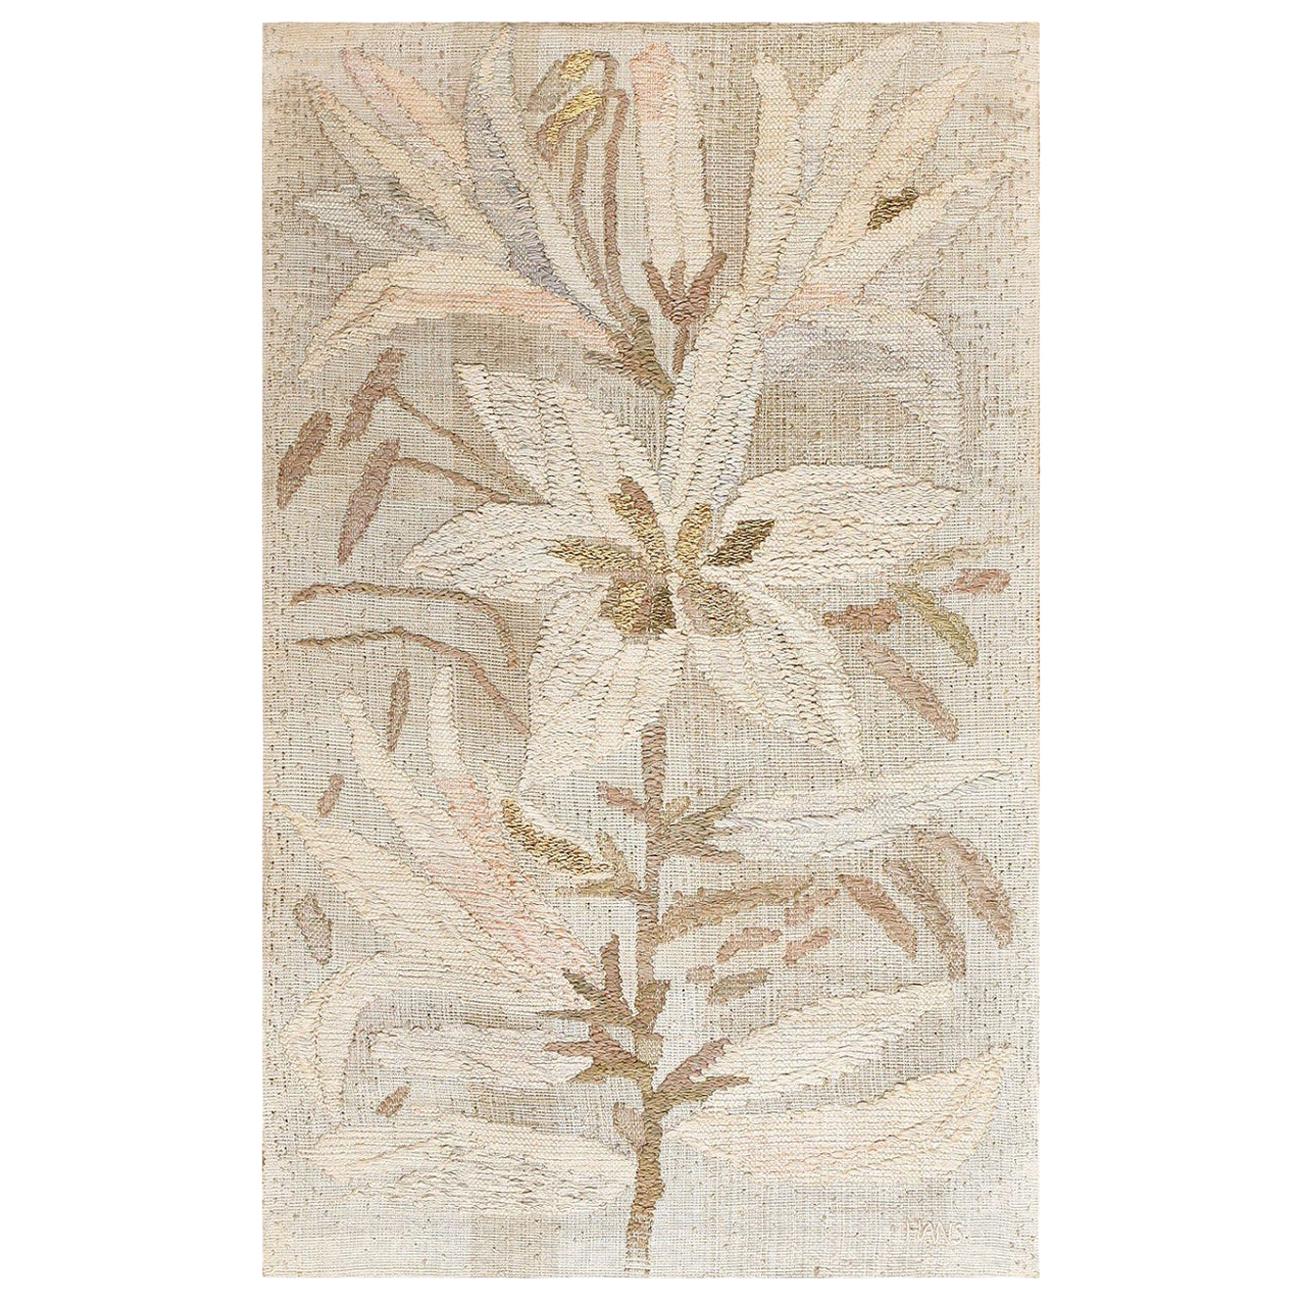 Hans Krondahl "Lillies" Tapestry. Size: 3 ft 5 in x 6 ft 6 in (1.04 m x 1.98 m)